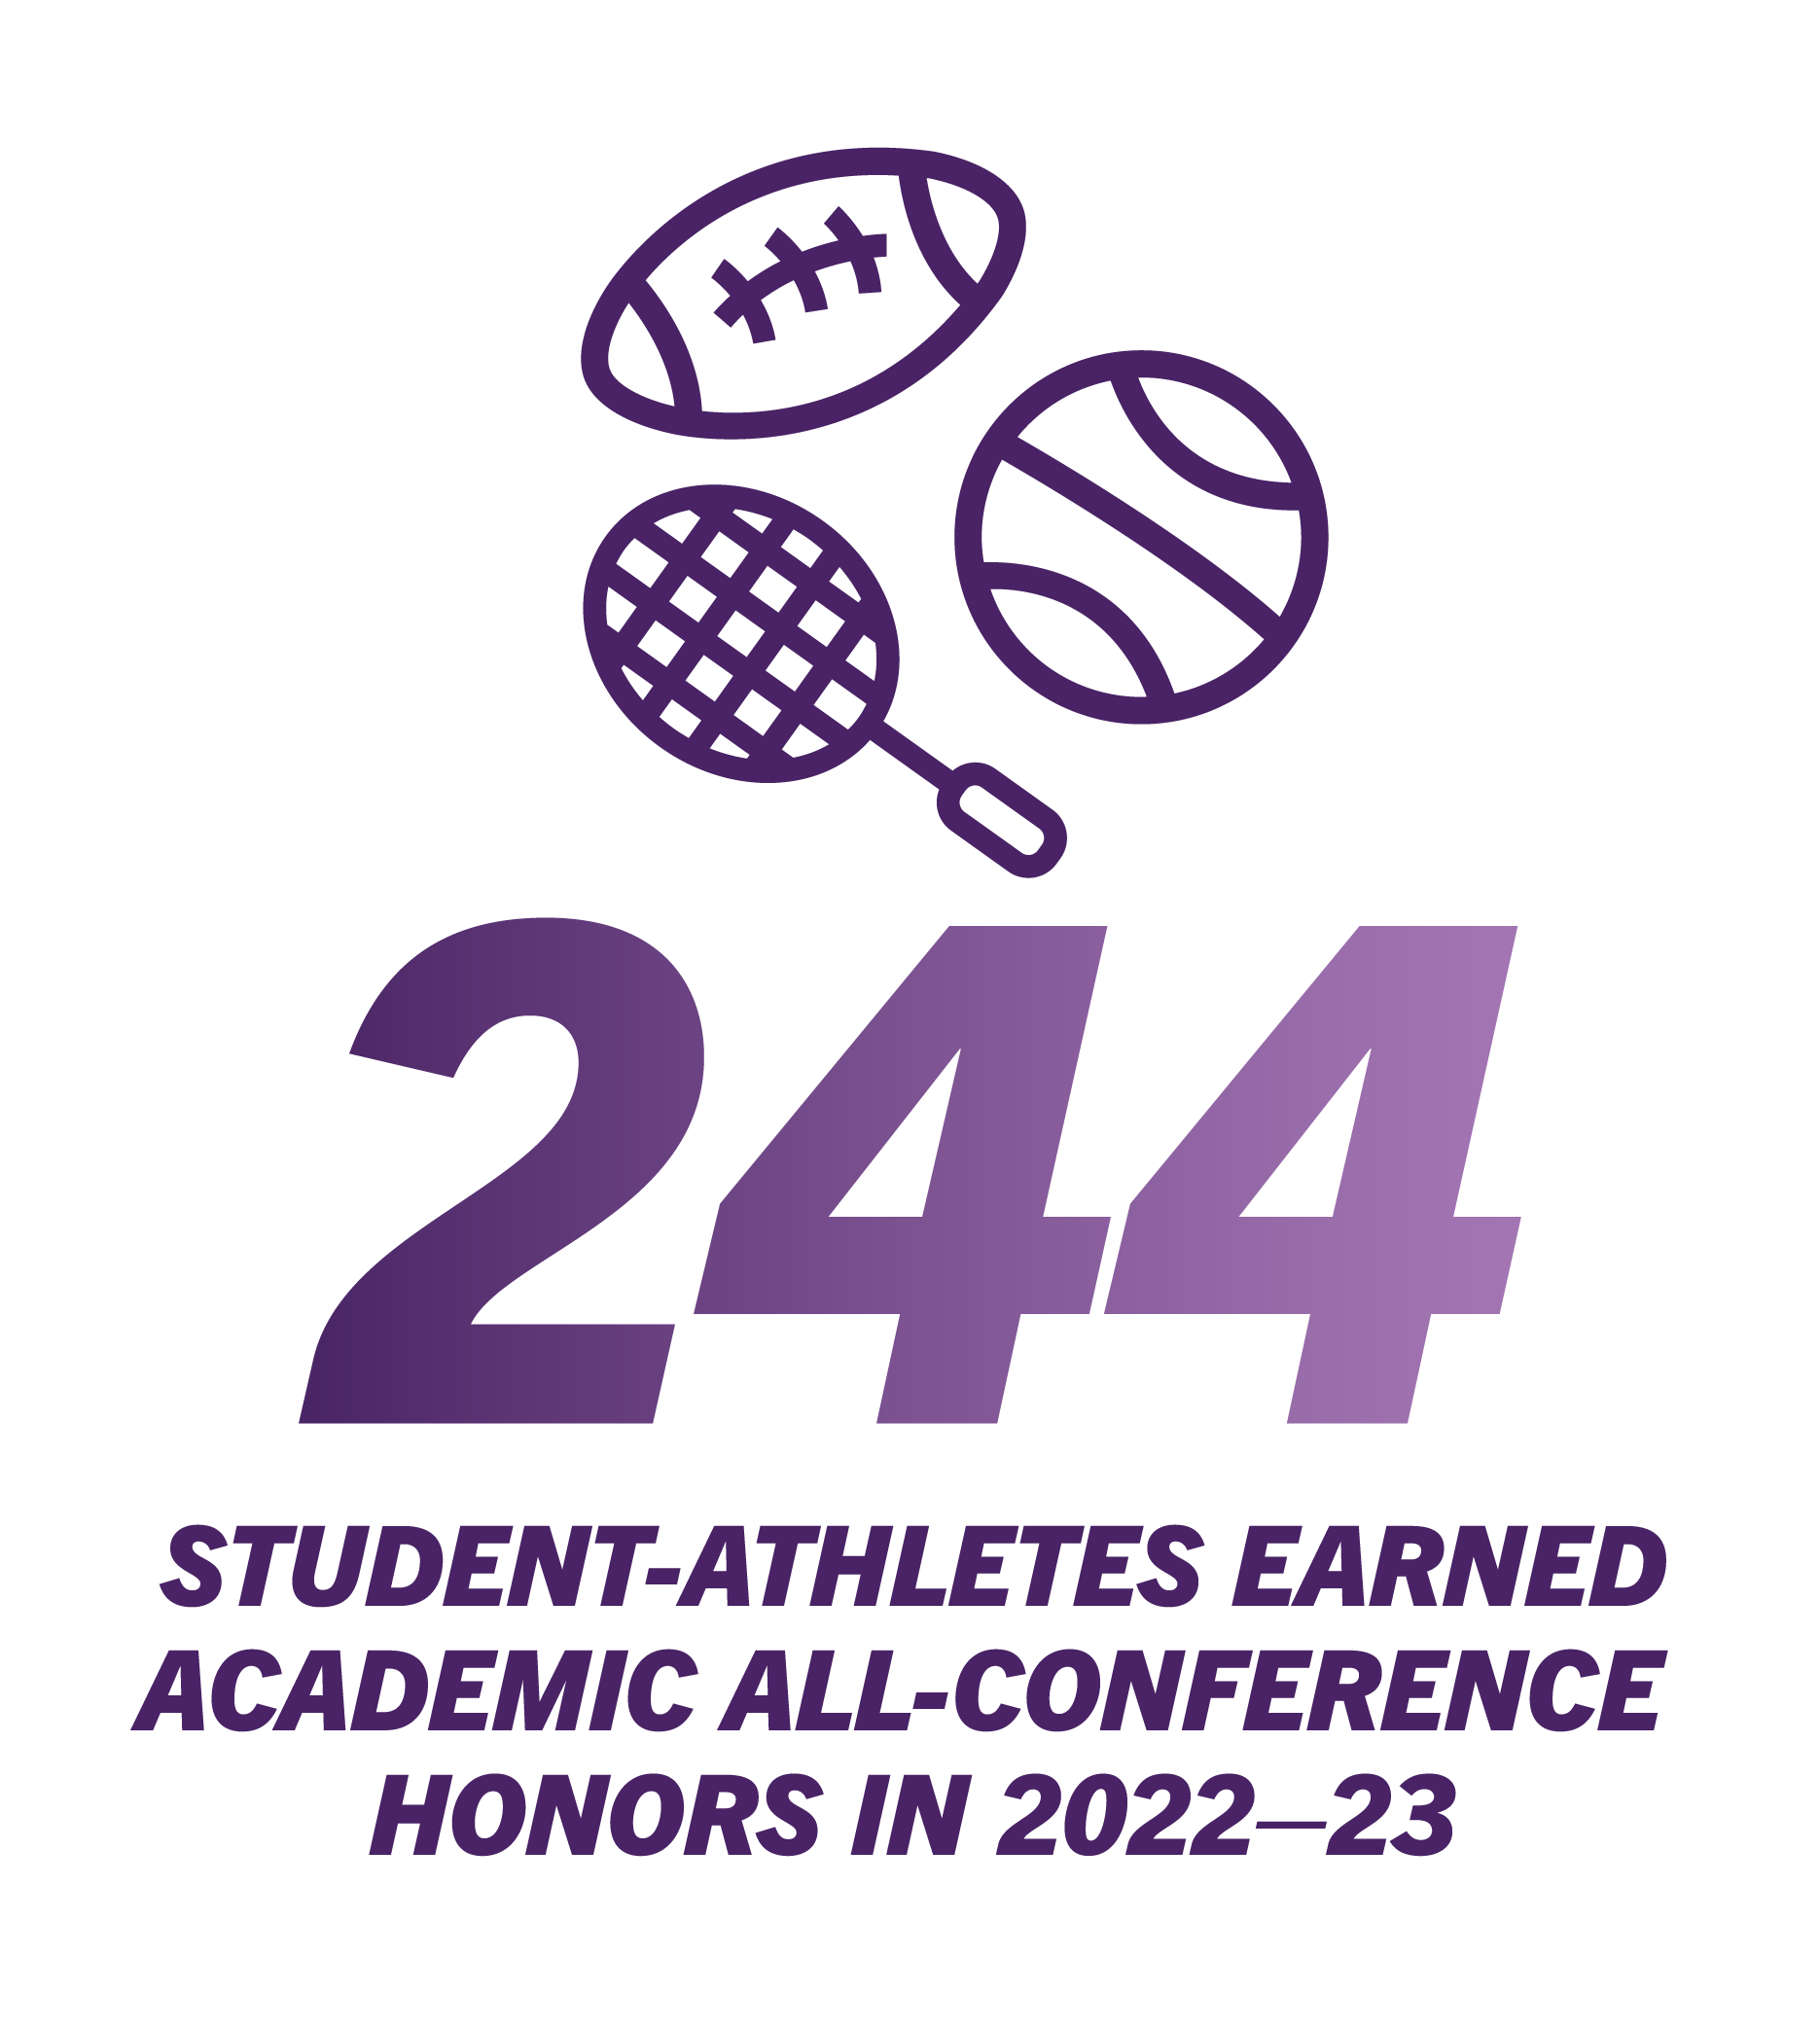 244 student-athletes earned academic All-Conference Honors in 2022-23.